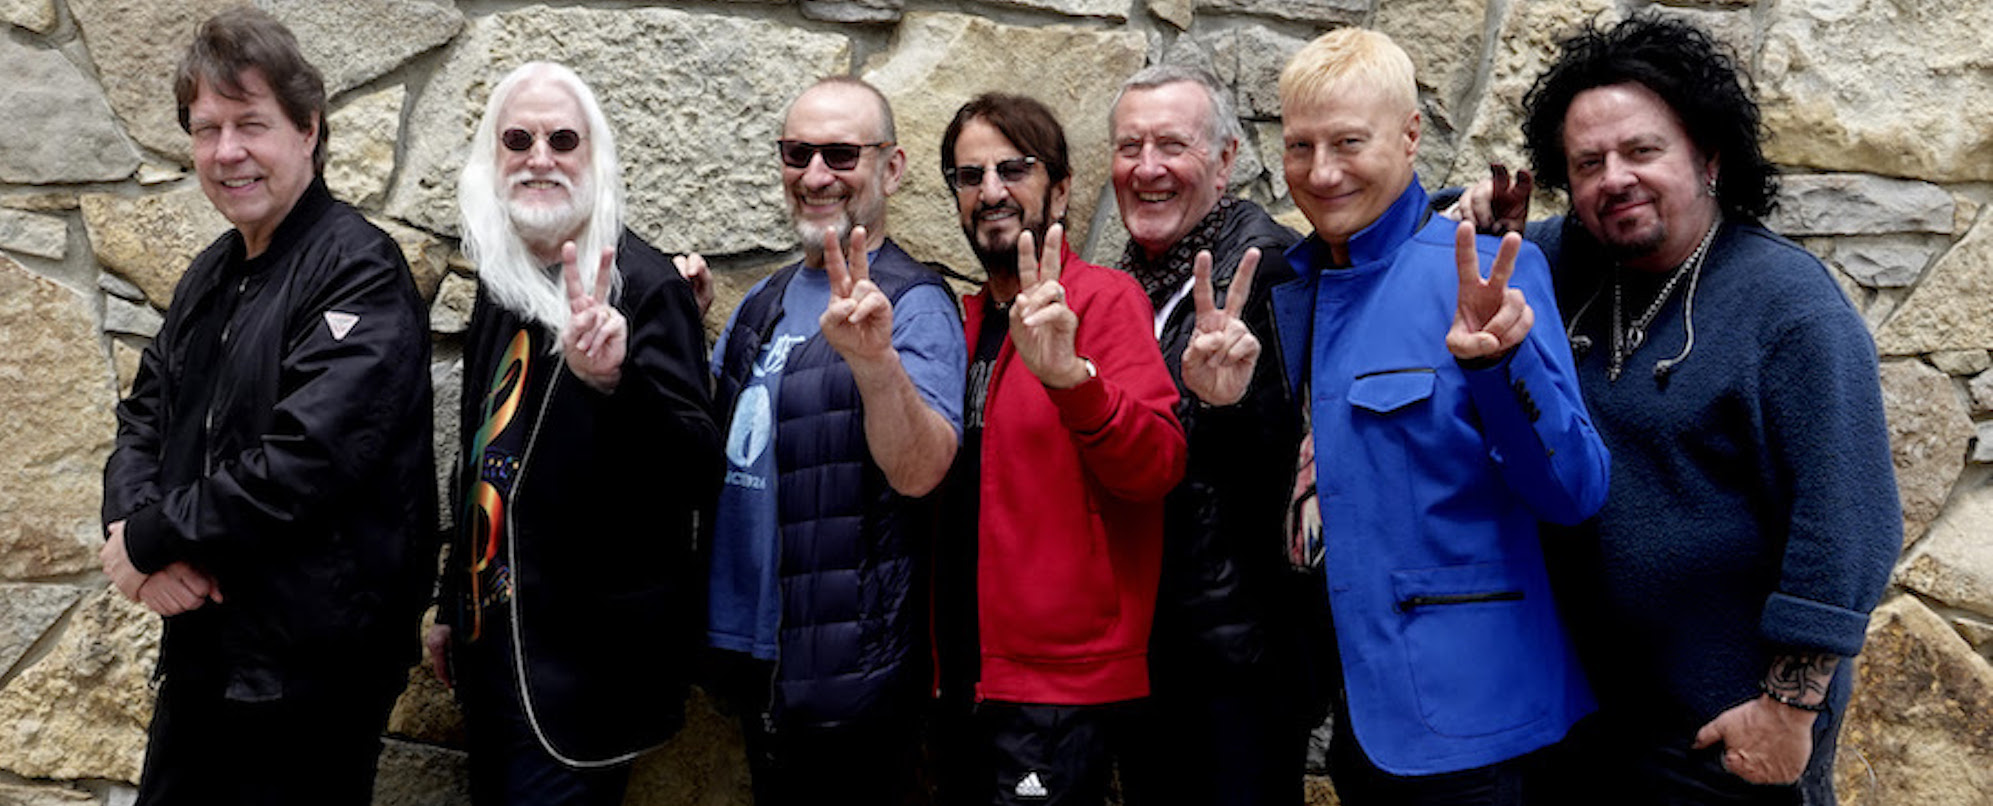 Ringo Starr’s All Starr Band Postpone Tour Dates After Edgar Winter, Steve Lukather Test Positive for COVID